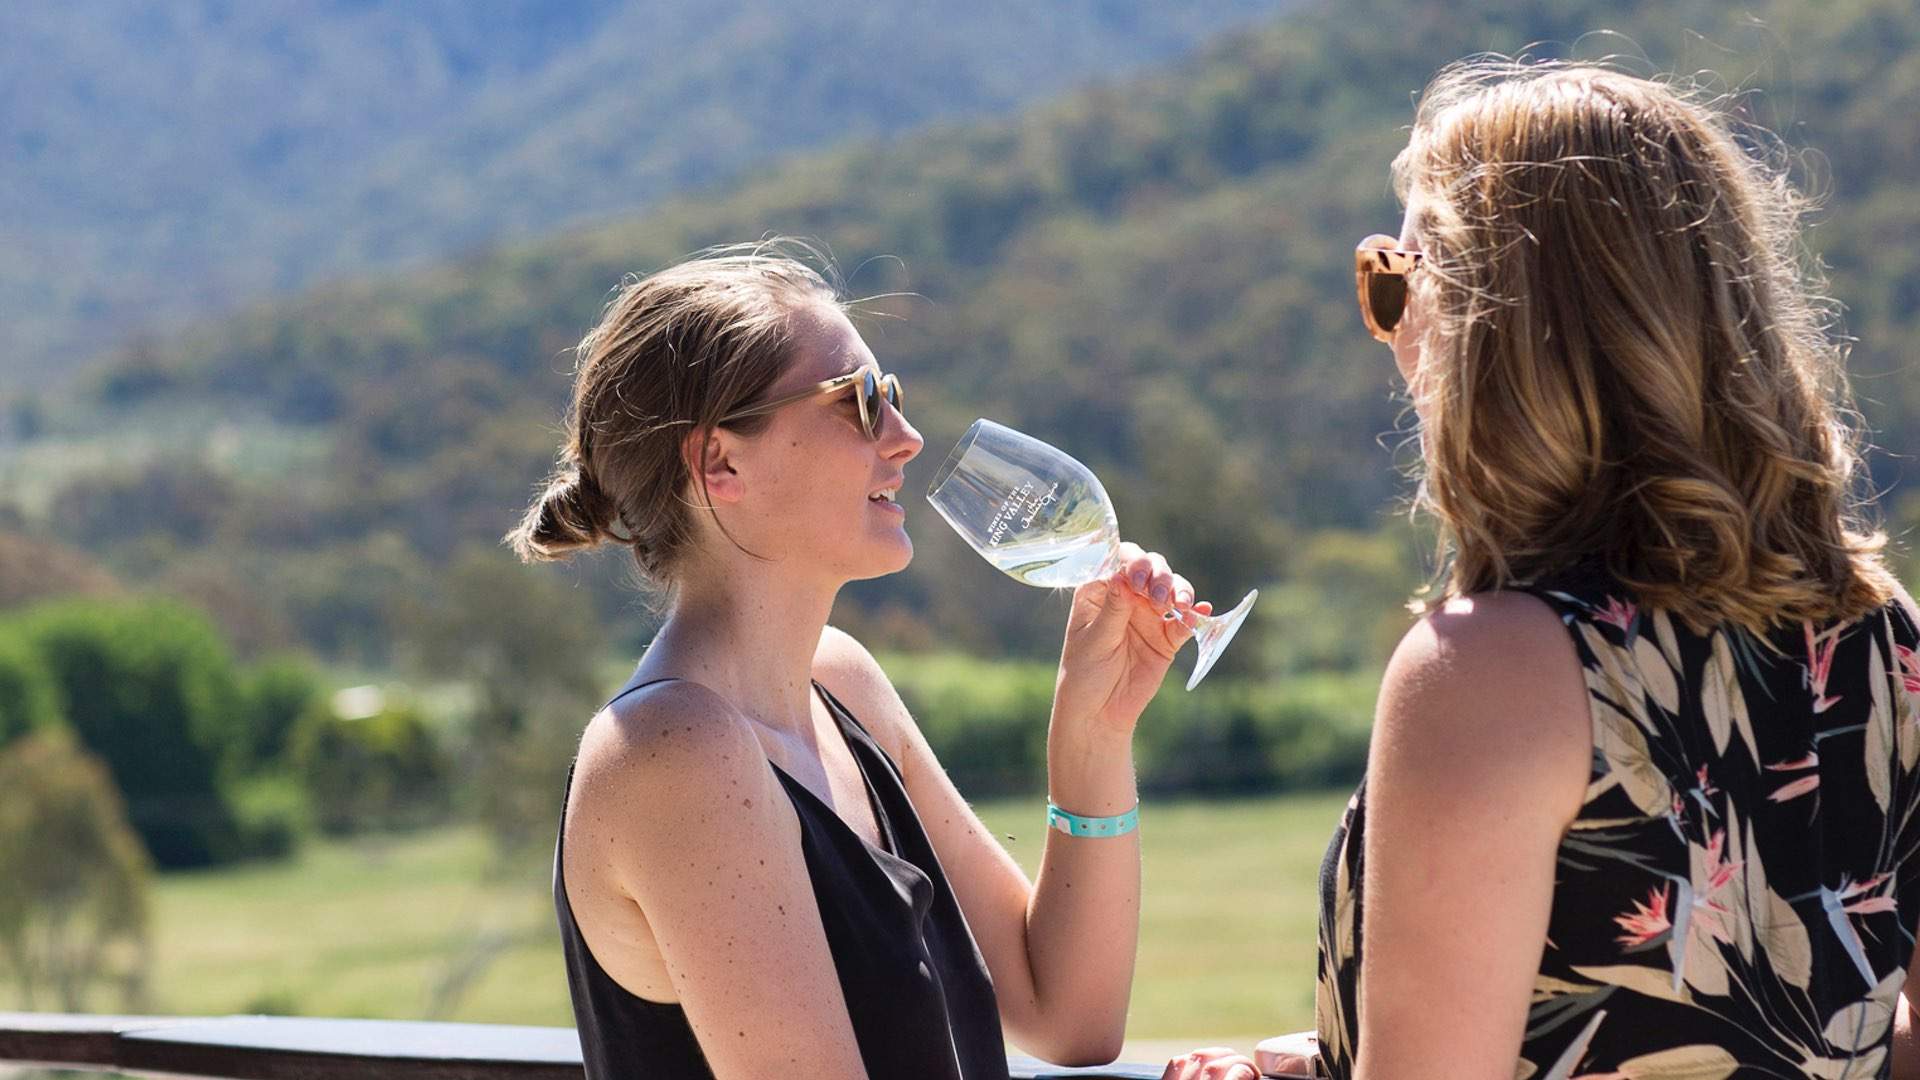 La Dolce Vita King Valley Wine and Food Festival